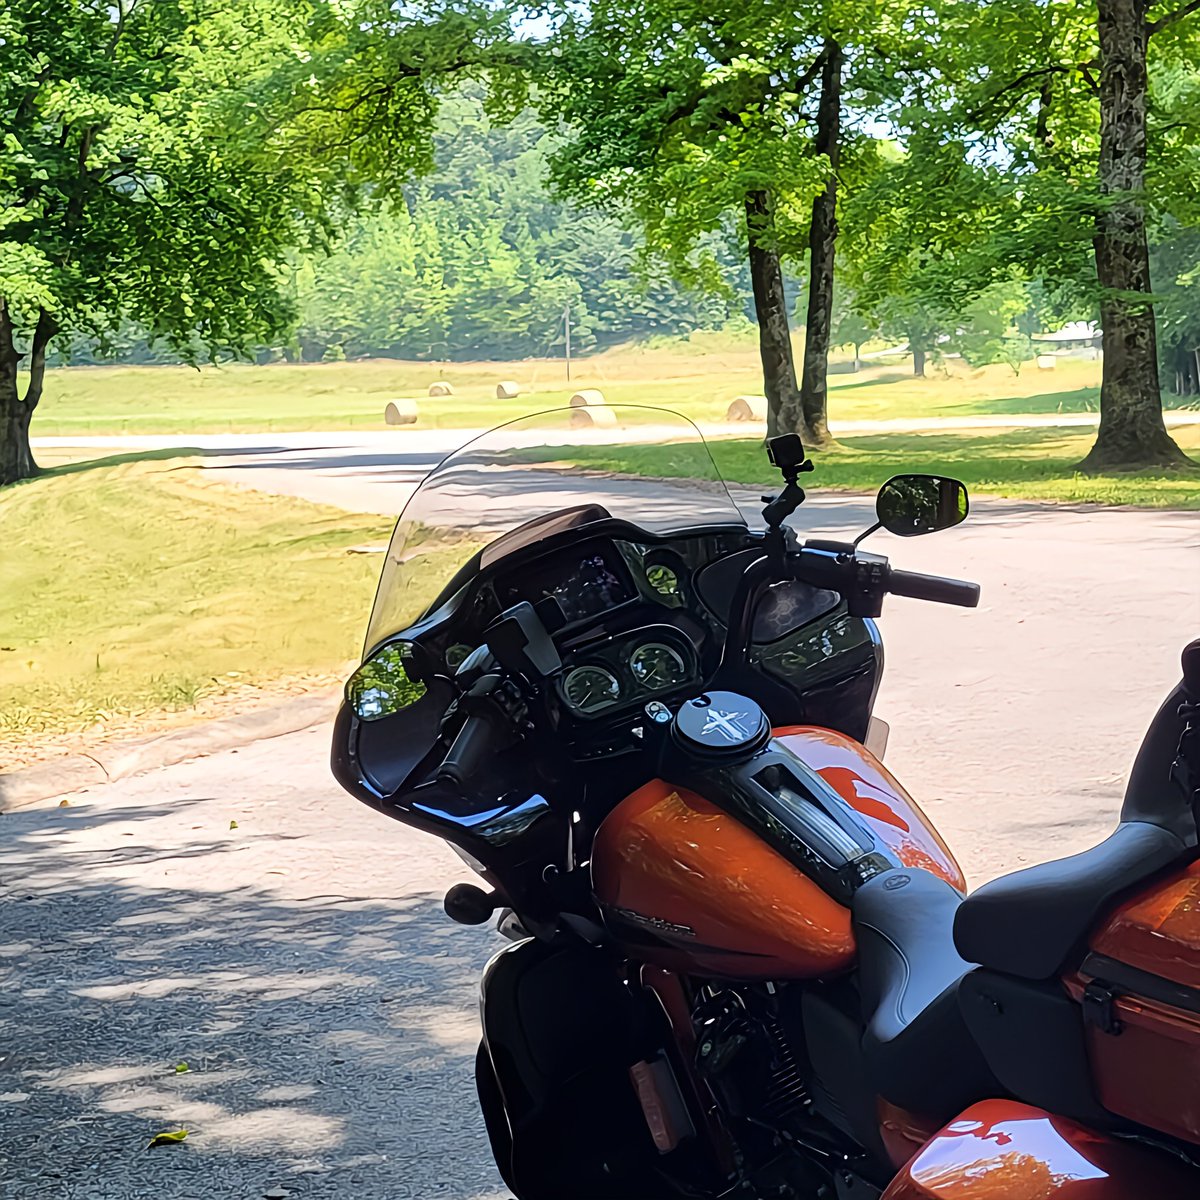 What better way to see this amazing country than on #2wheels
.
#MotorcycleDen #harleydavidson #roadglidelimited #roadglide #2wheellife #roadglidenation #windtherapy #scenery #scenic #scenicview